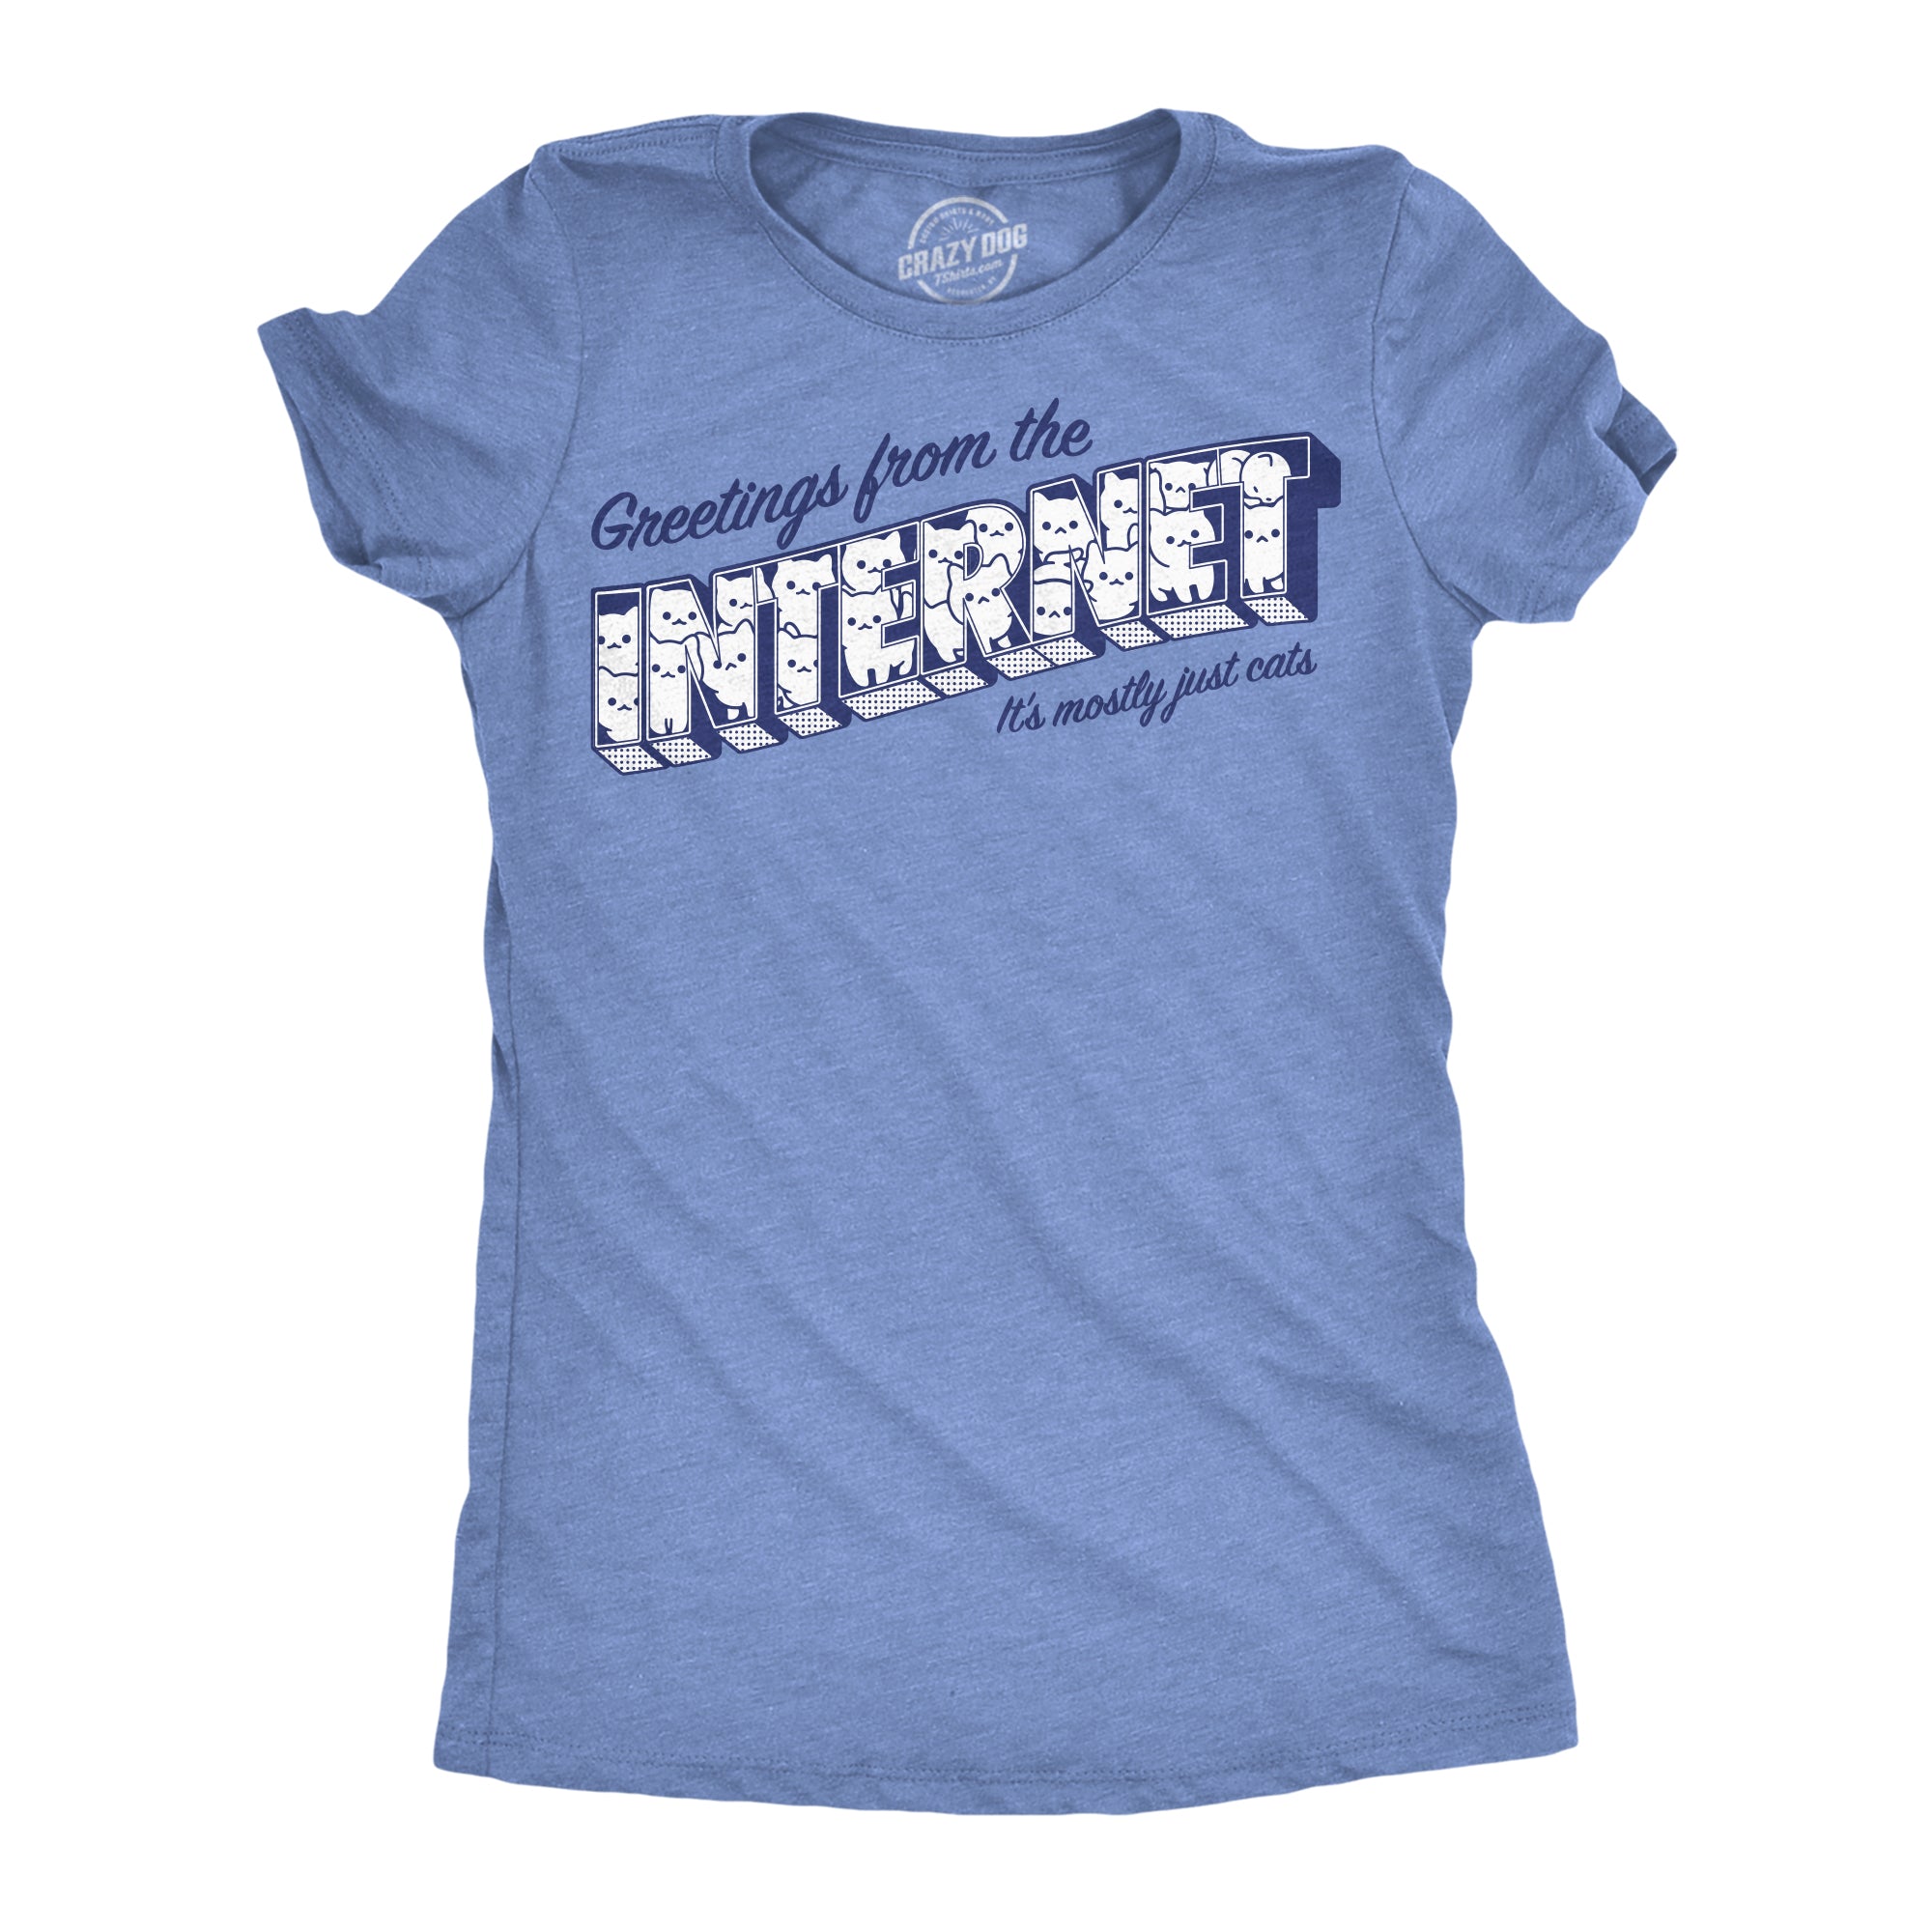 Funny Light Heather Blue - Greetings From The Internet Greetings From The Internet Its Mostly Cats Womens T Shirt Nerdy Cat internet Tee